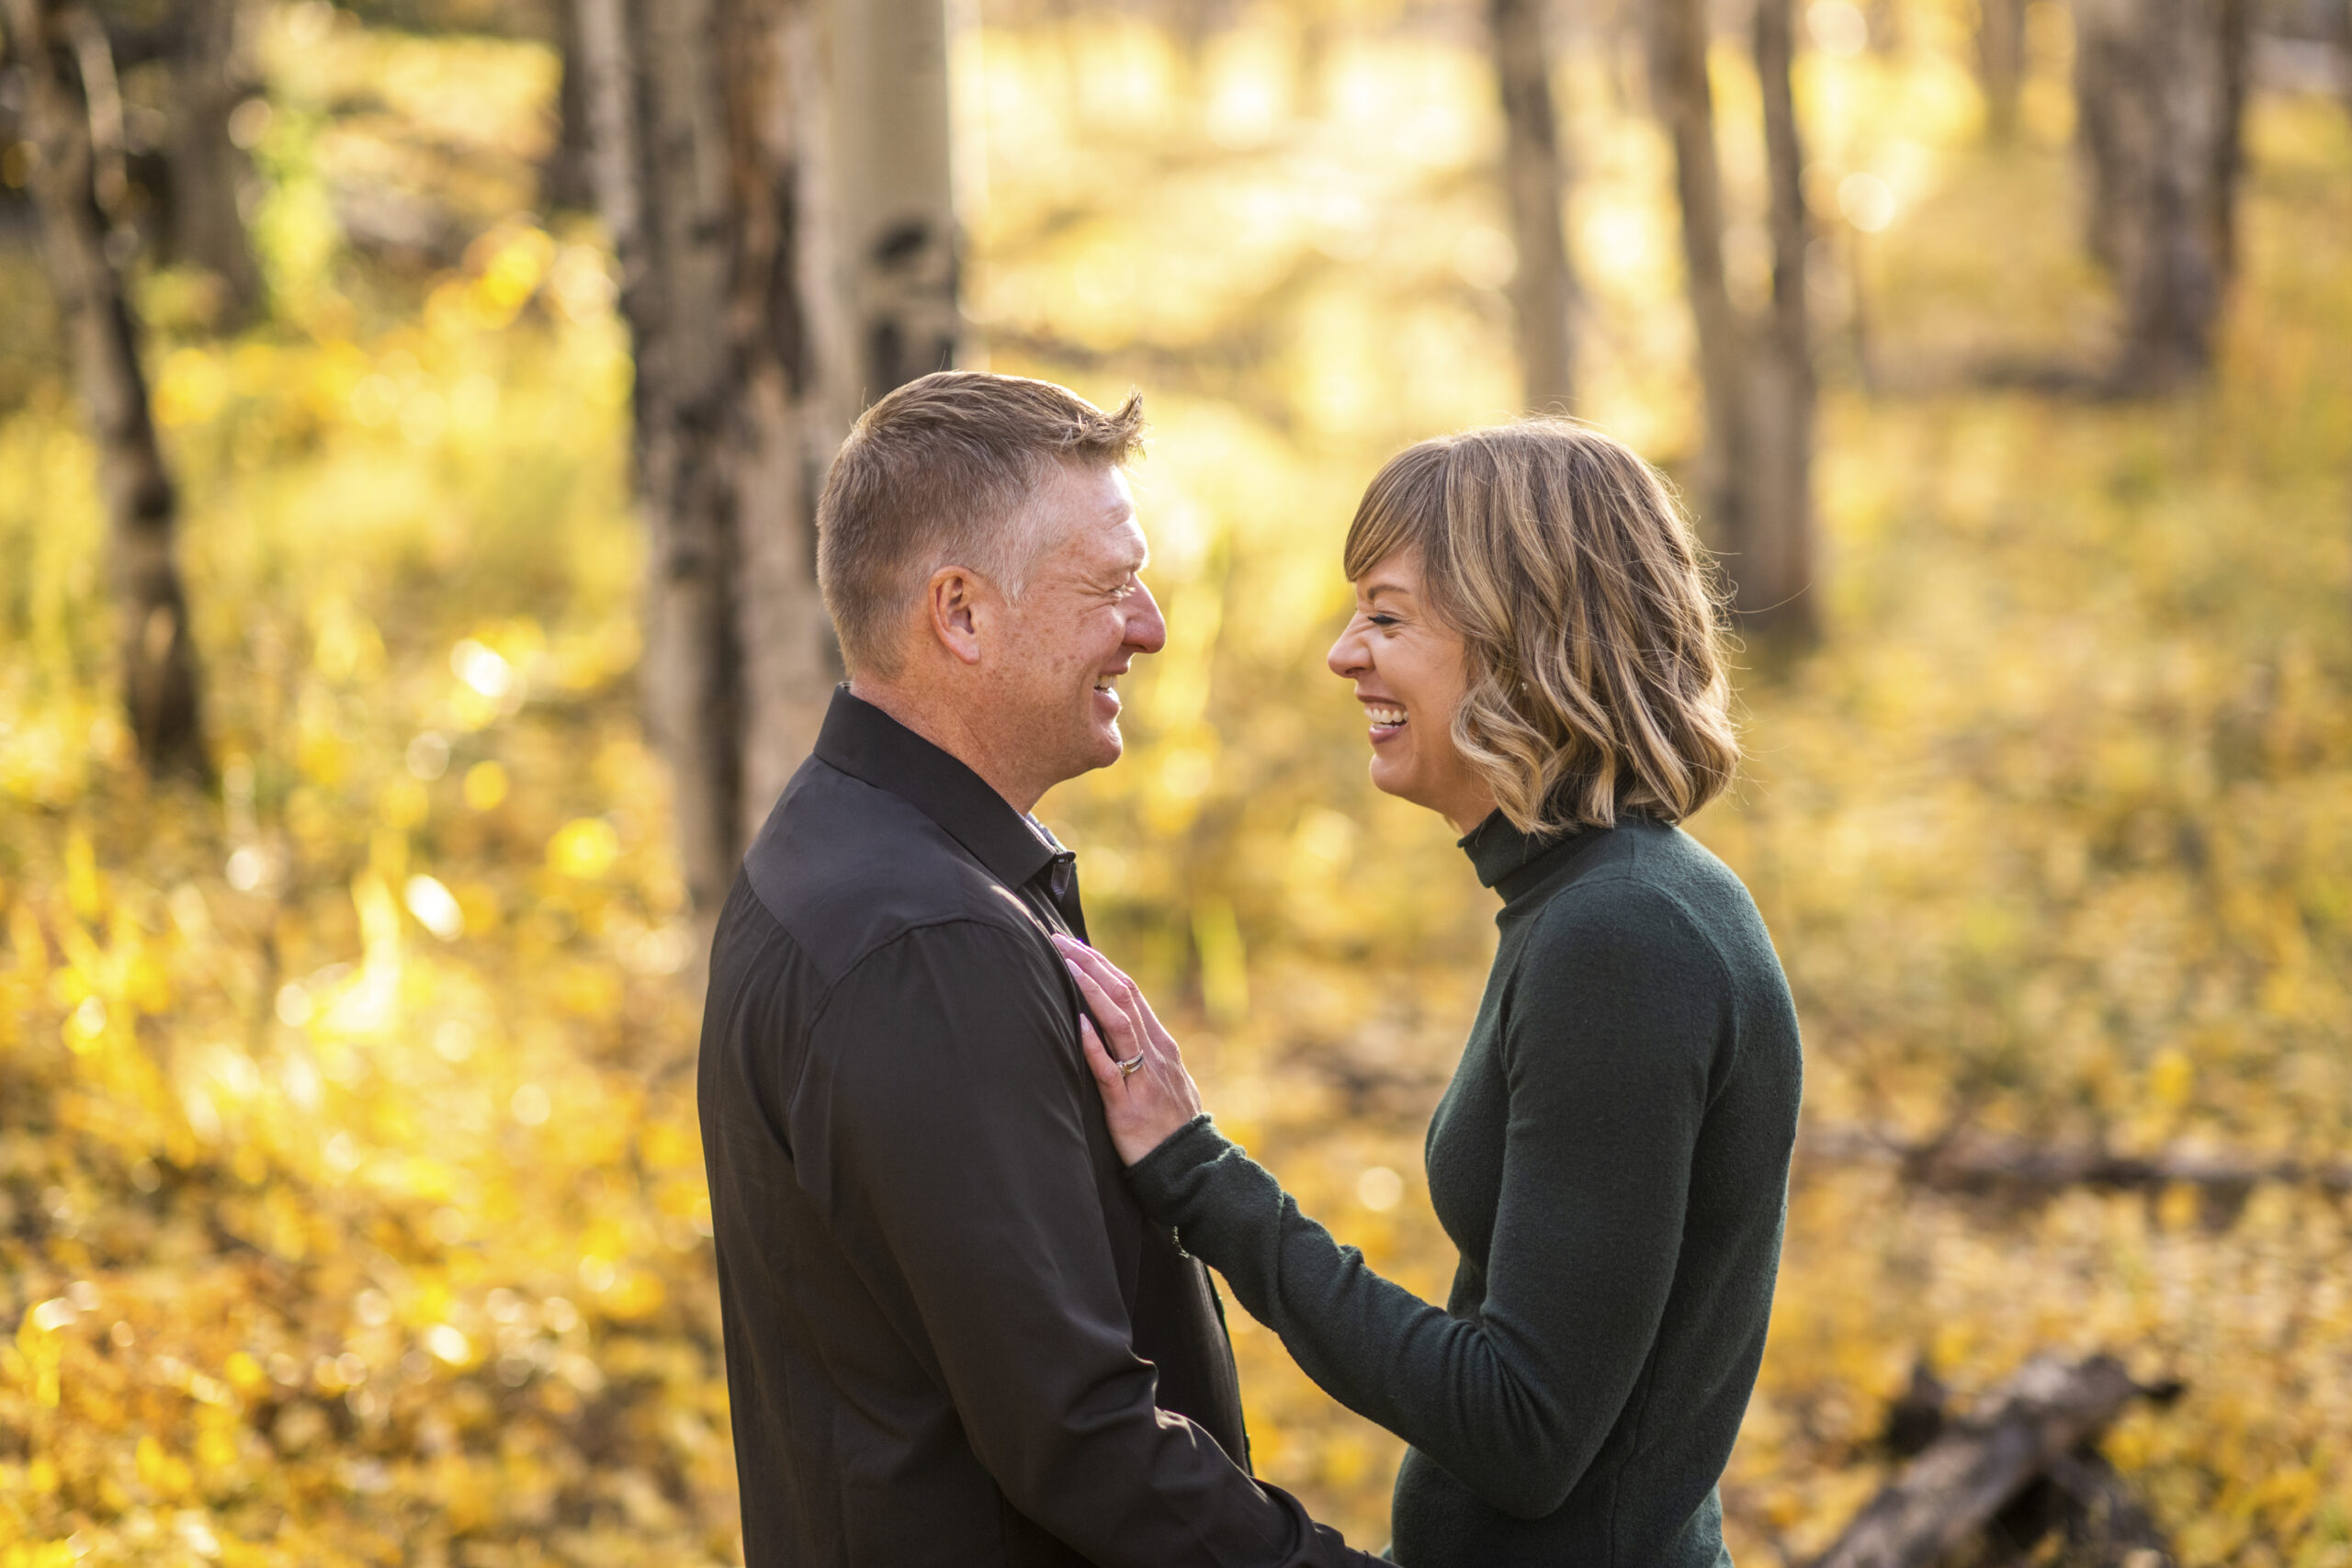 A woman in a green shirt smiles with her hand on a man in a black shirt surrounded by yellow fall colors during an engagement session at Meyer Ranch Park in Colorado.